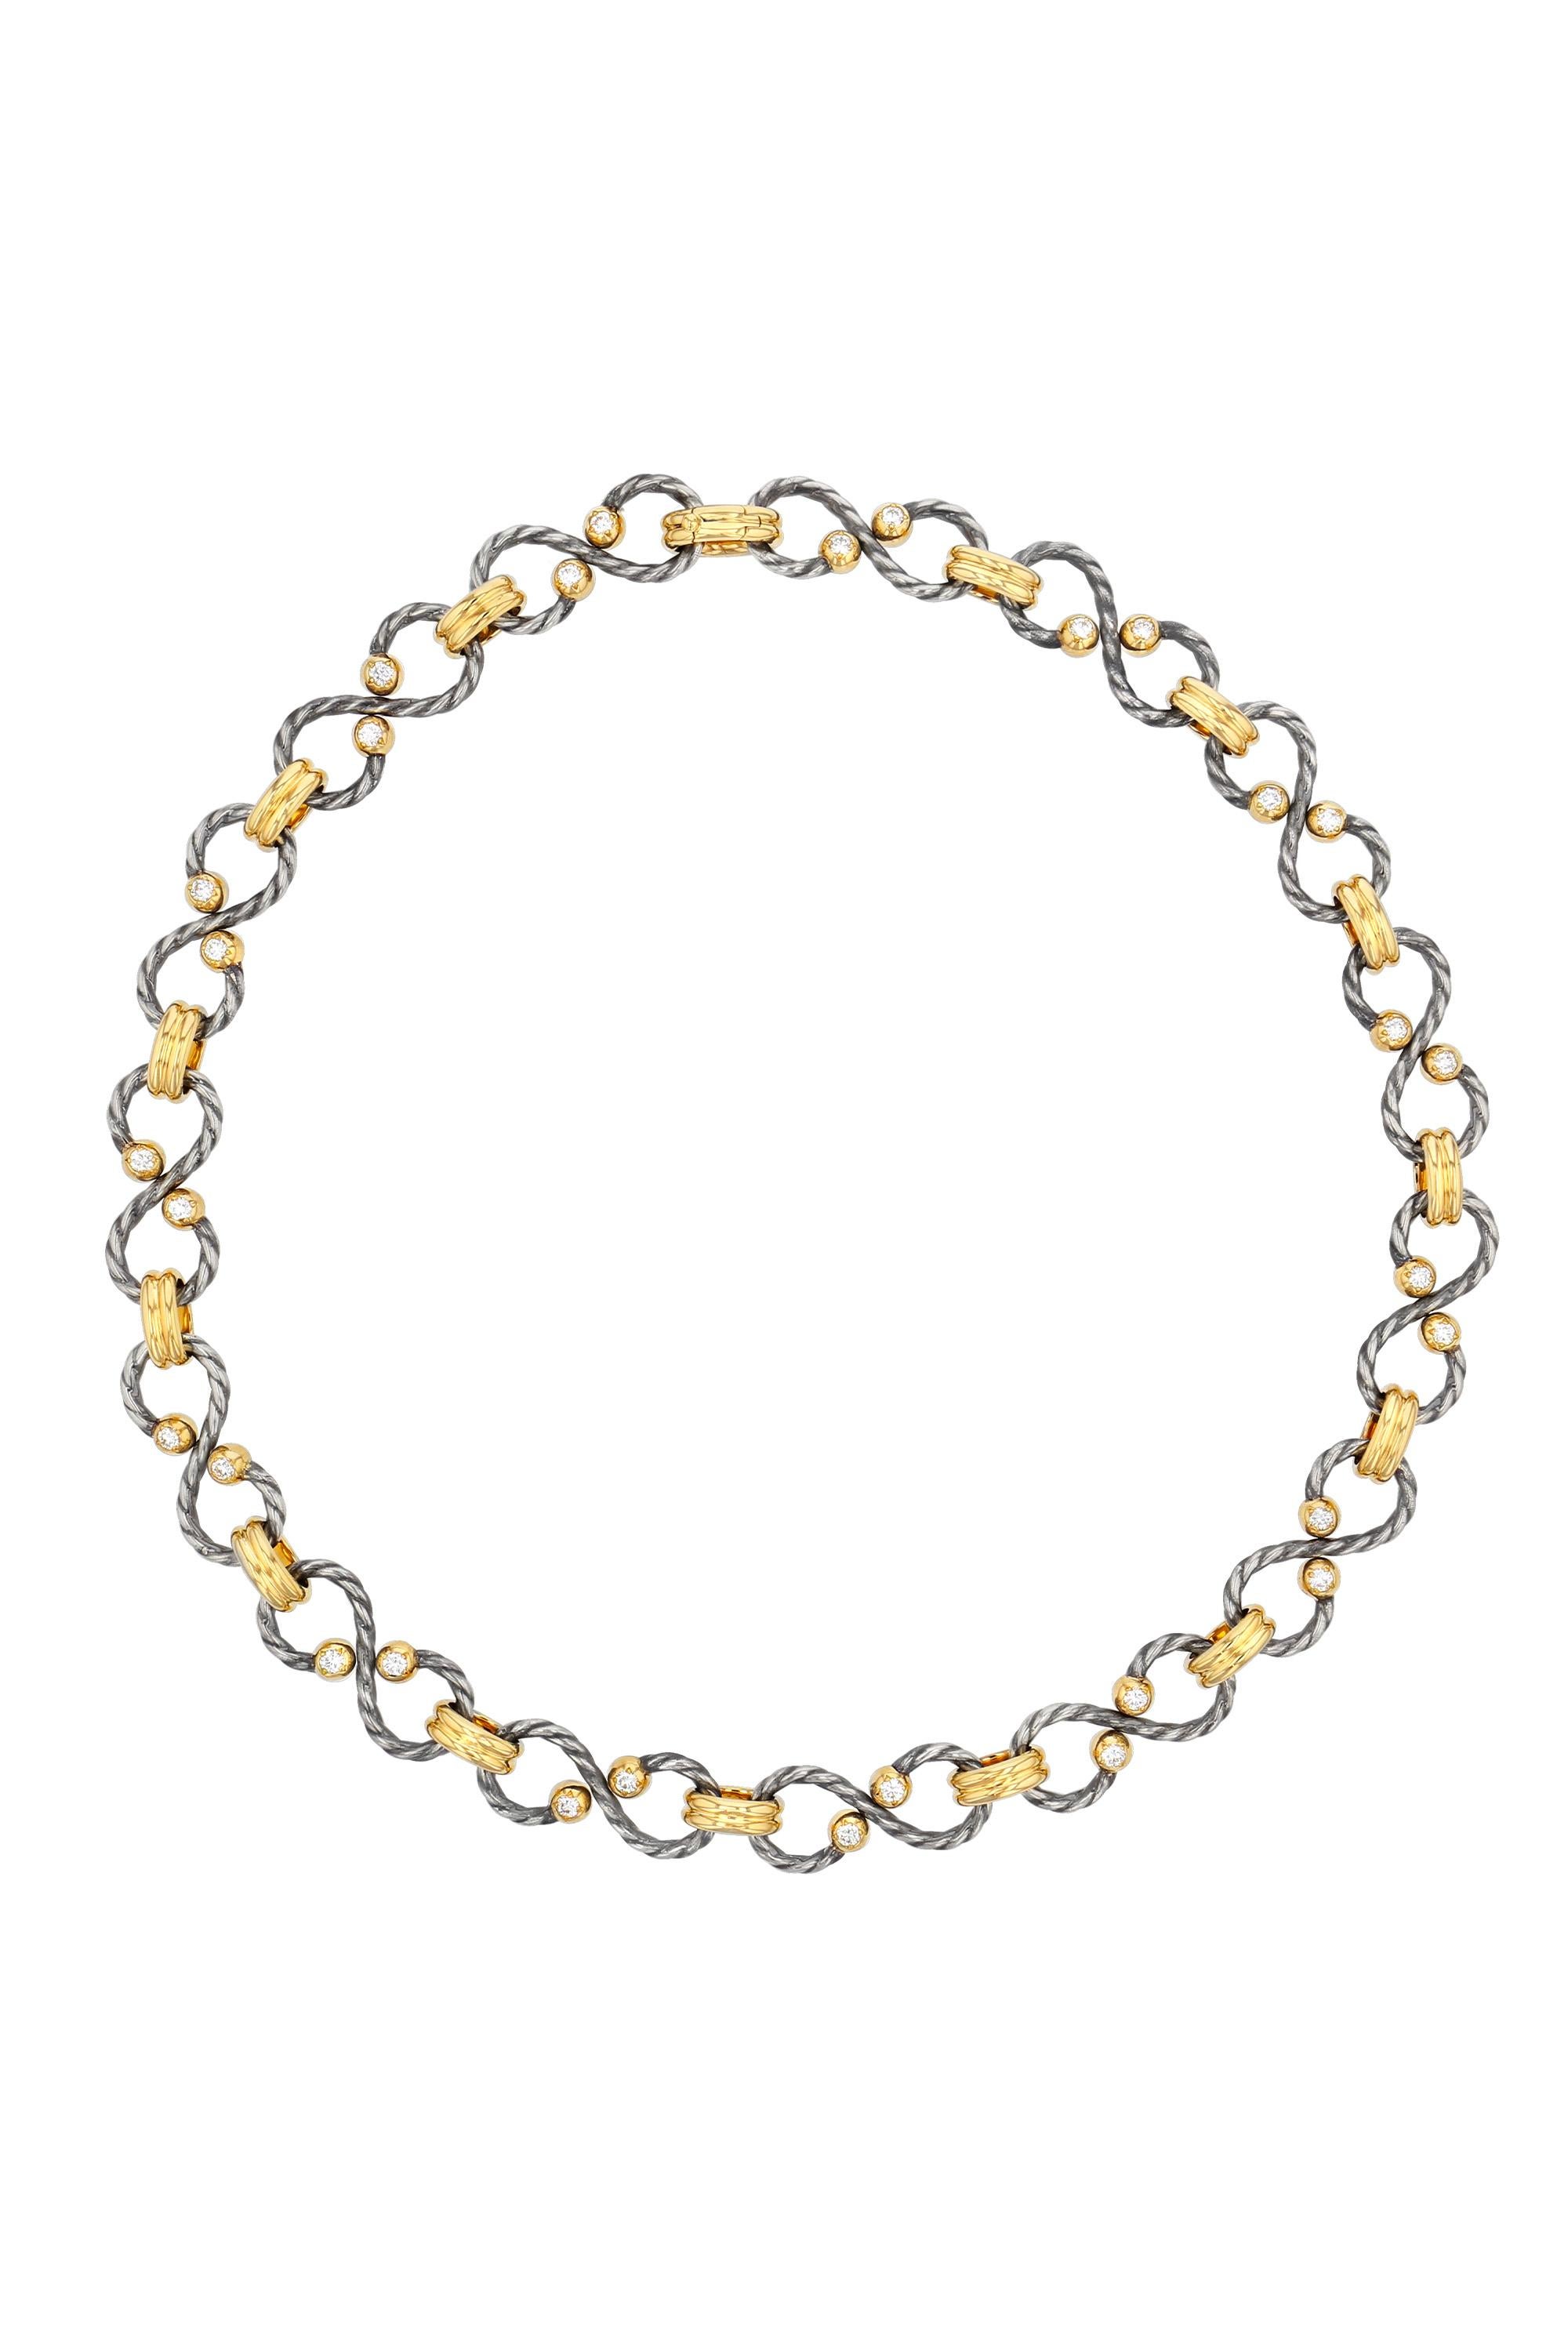 Choker chain alternating yellow gold gadrooned rings and distressed silver twisted serpentine rings punctuated with gold balls set with a diamond.

Details:
GVS Diamonds: 1.2 cts
18k Yellow Gold : 35 g
925 Distressed Silver : 20 g
Made in France